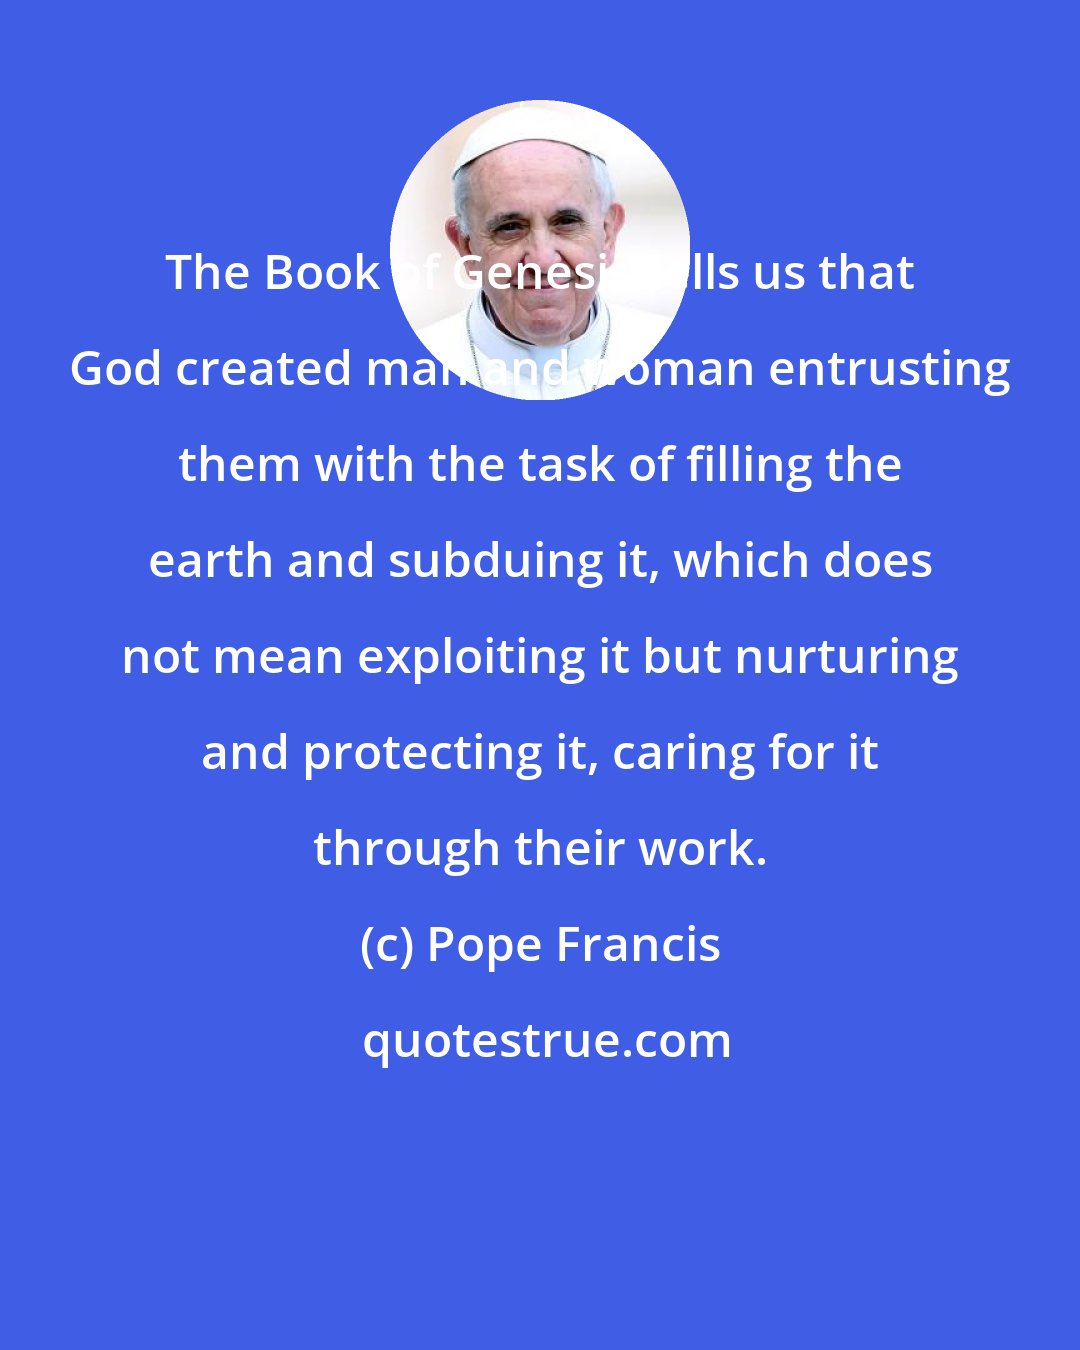 Pope Francis: The Book of Genesis tells us that God created man and woman entrusting them with the task of filling the earth and subduing it, which does not mean exploiting it but nurturing and protecting it, caring for it through their work.